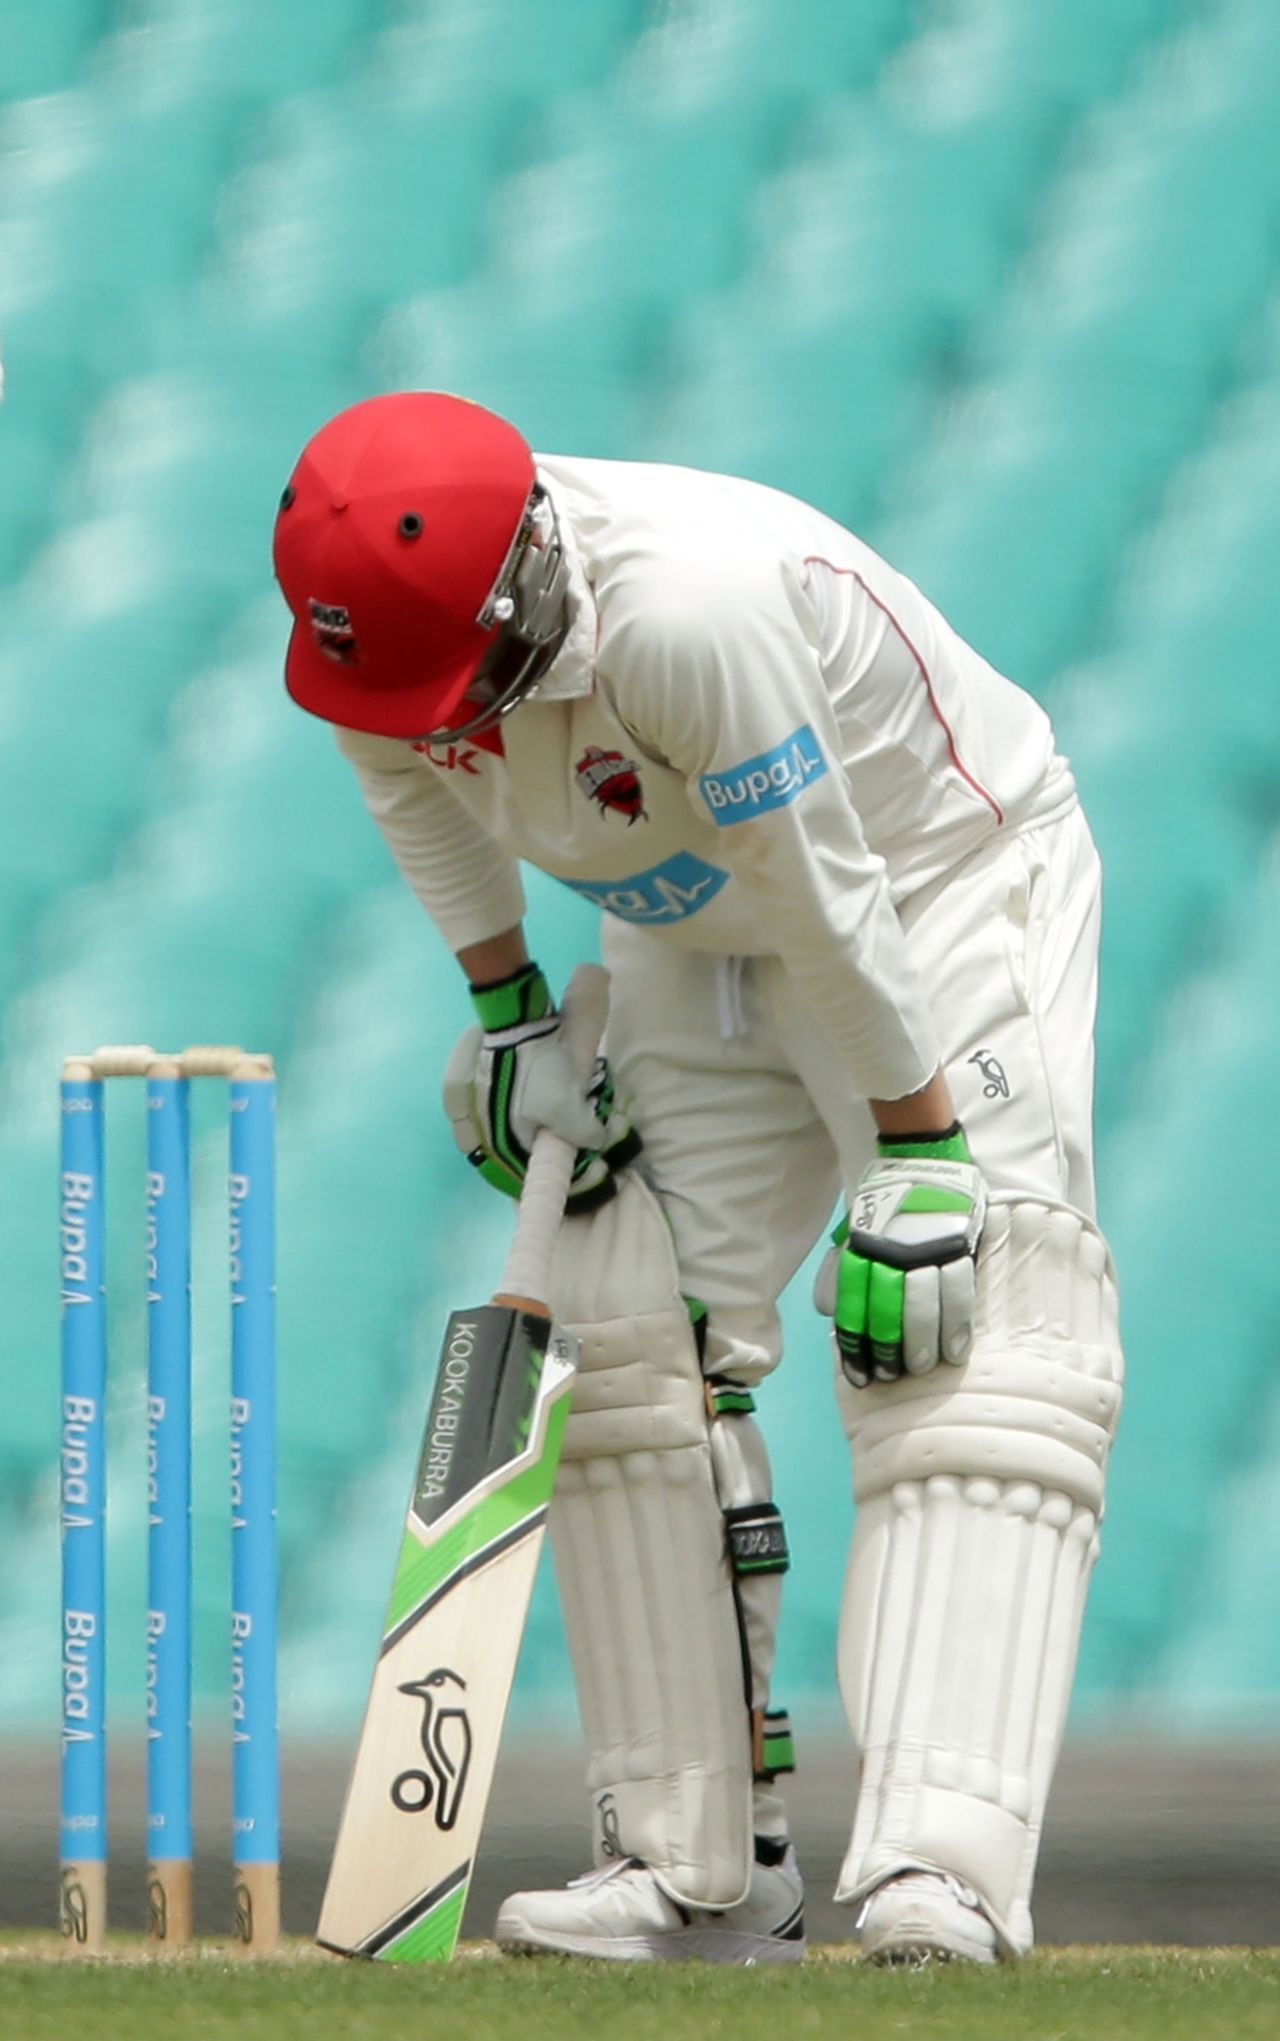 Phillip Hughes tries to gather himself after being struck by a Sean Abbott bouncer, New South Wales v South Australia, Sheffield Shield, Sydney, 1st day, November 25, 2014